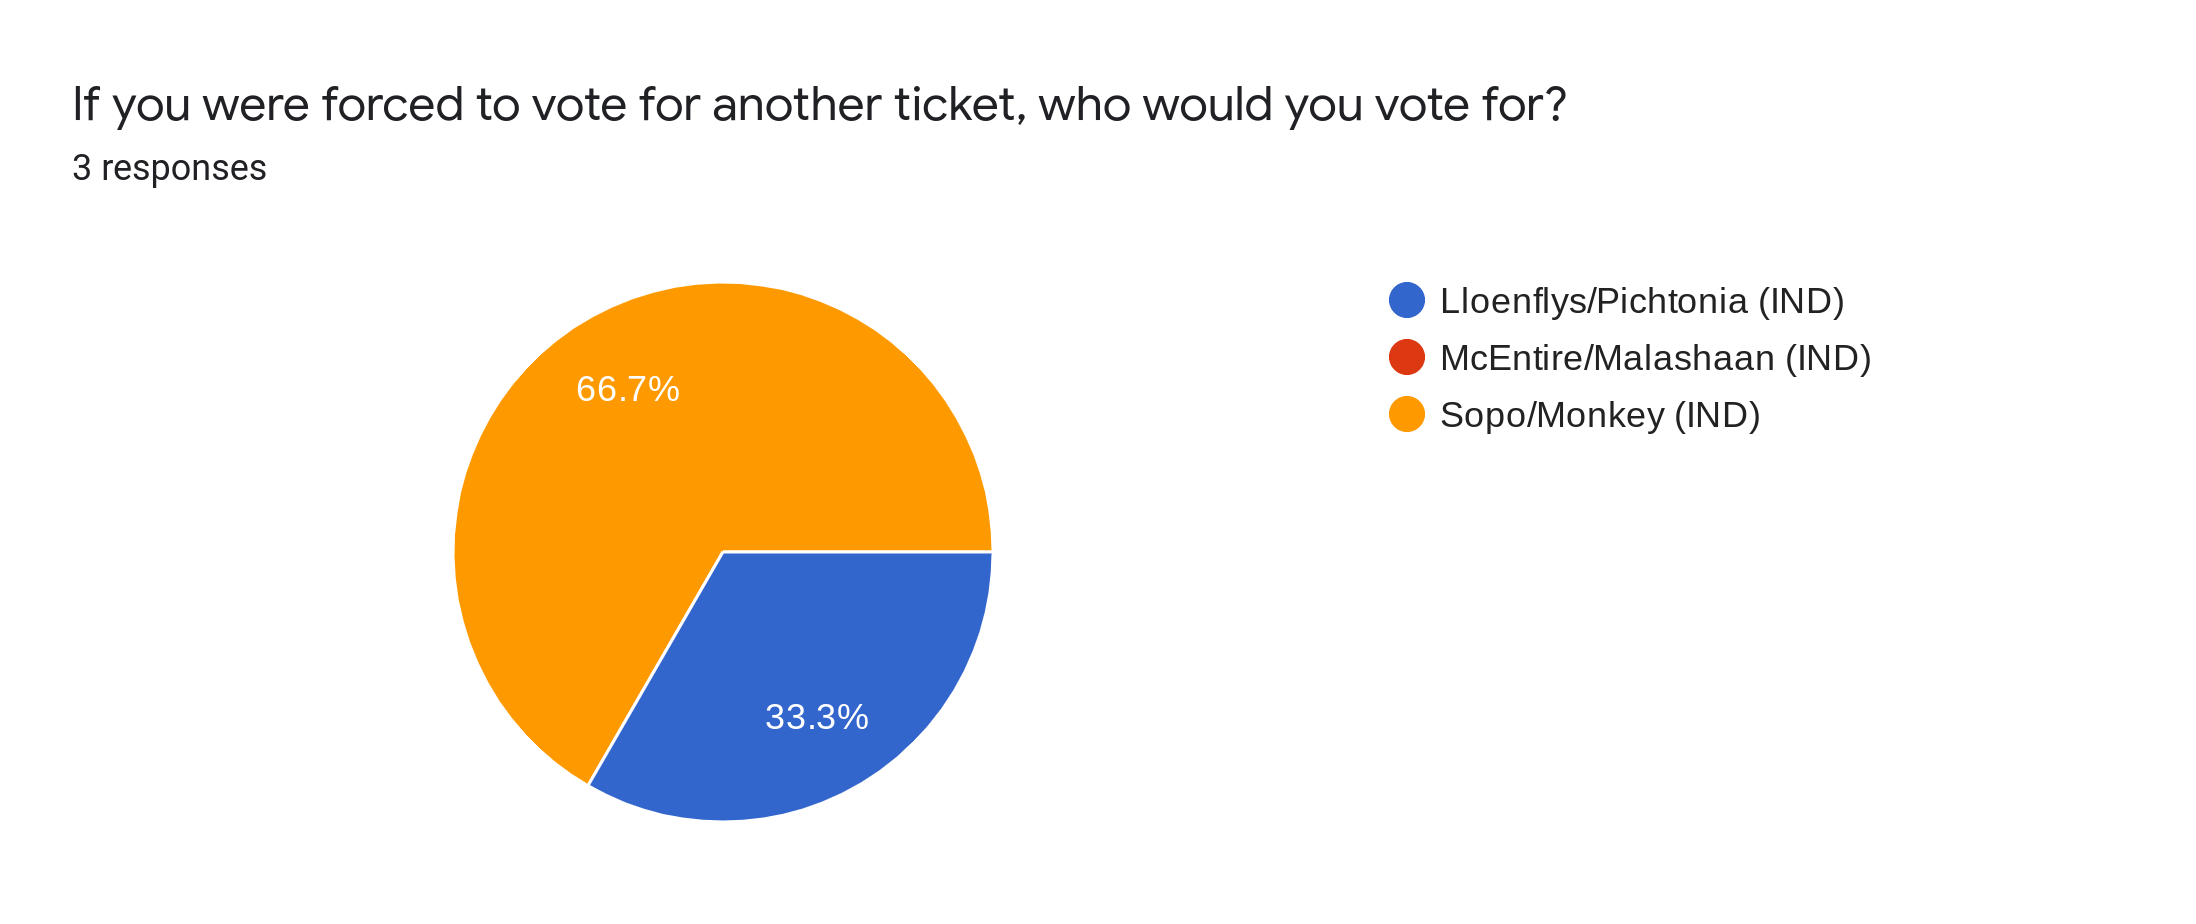 Forms response chart. Question title: If you were forced to vote for another ticket, who would you vote for?. Number of responses: 3 responses.